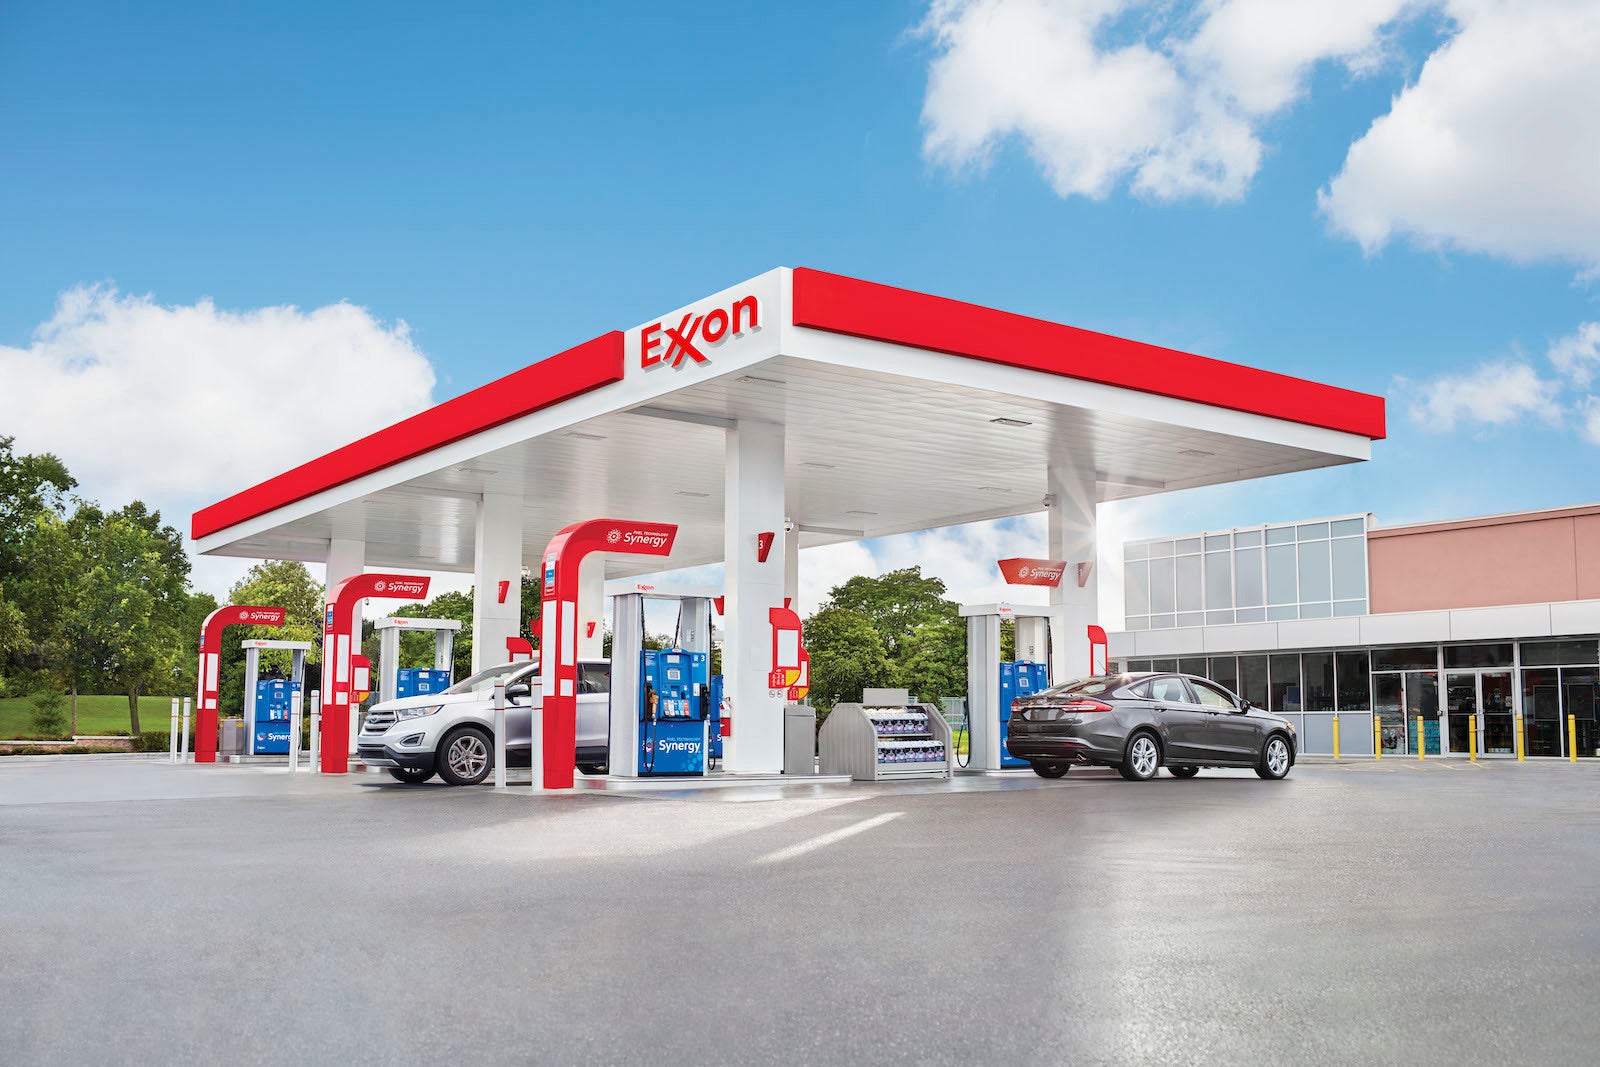 Save at least 10 cents per gallon with the newly enhanced Exxon Mobil Smart Card+